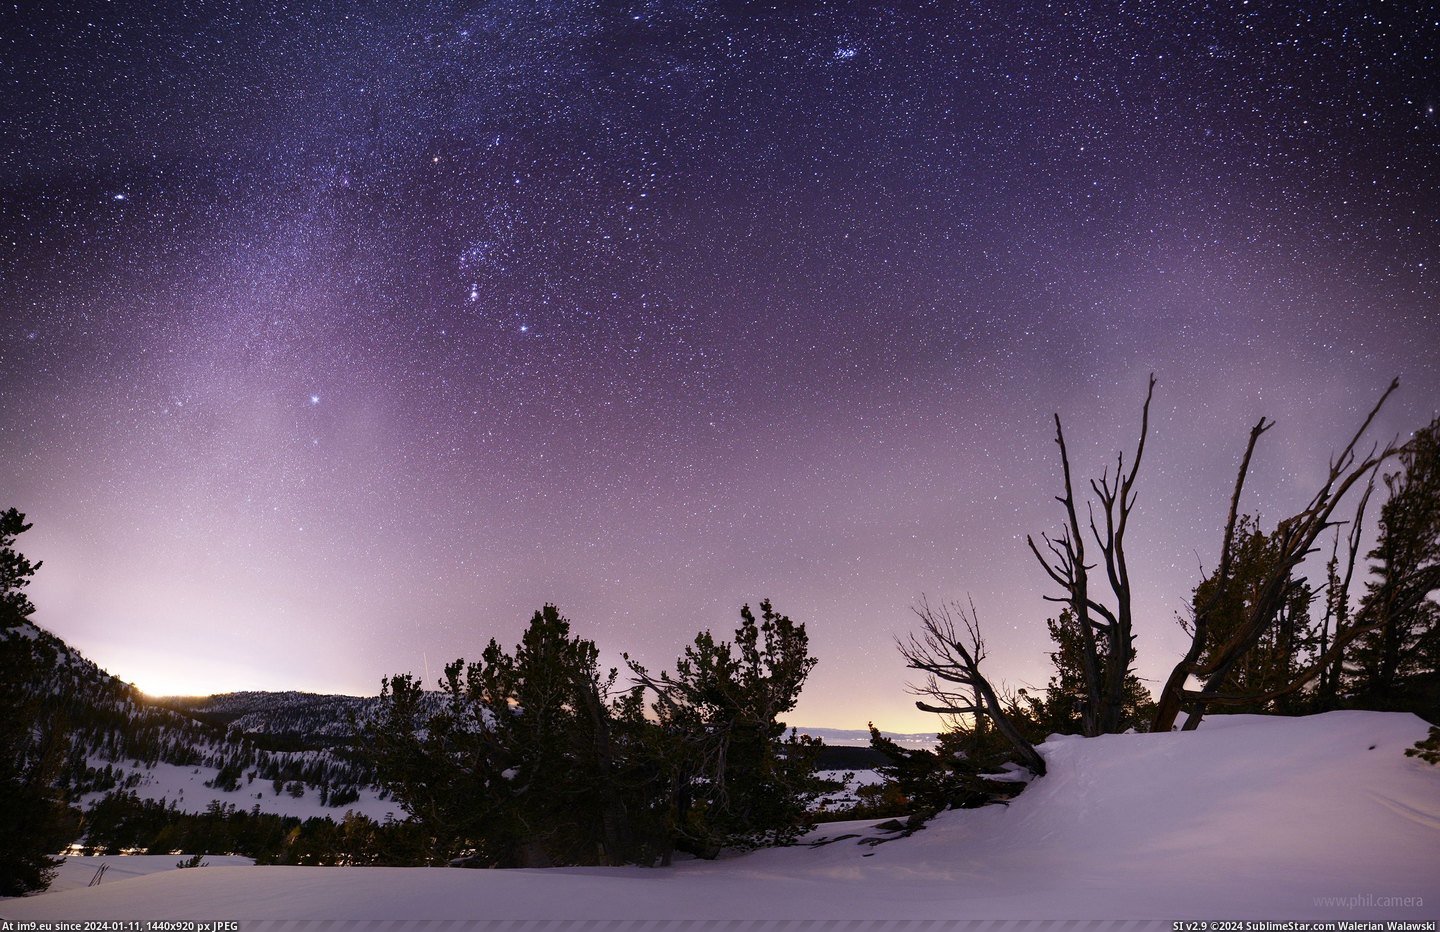 #Nature #Photo #Wallpaper #Night #Lake #Left #Winter #Rose #Sky #Stars [Earthporn] Winter Night Sky over The Mt Rose - Sheep Flat meadow last night, with Carson down to the left and Lake Tahoe peakin Pic. (Bild von album My r/EARTHPORN favs))